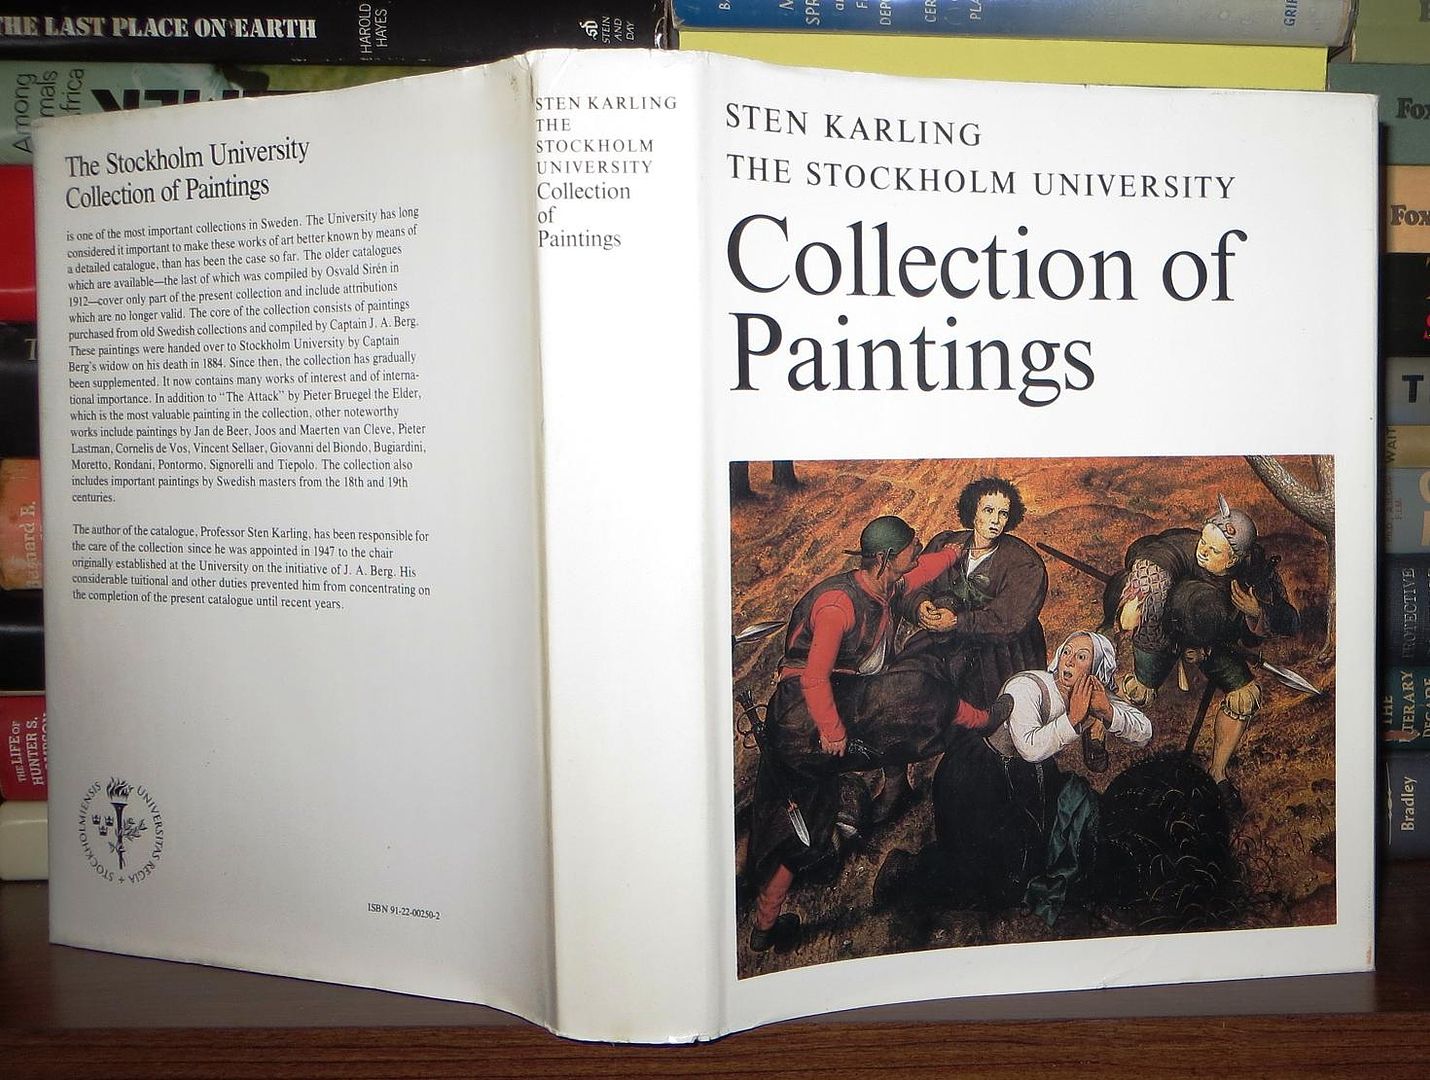 KARLING, STEN - The Stockholm University Collection of Paintings Catalogue